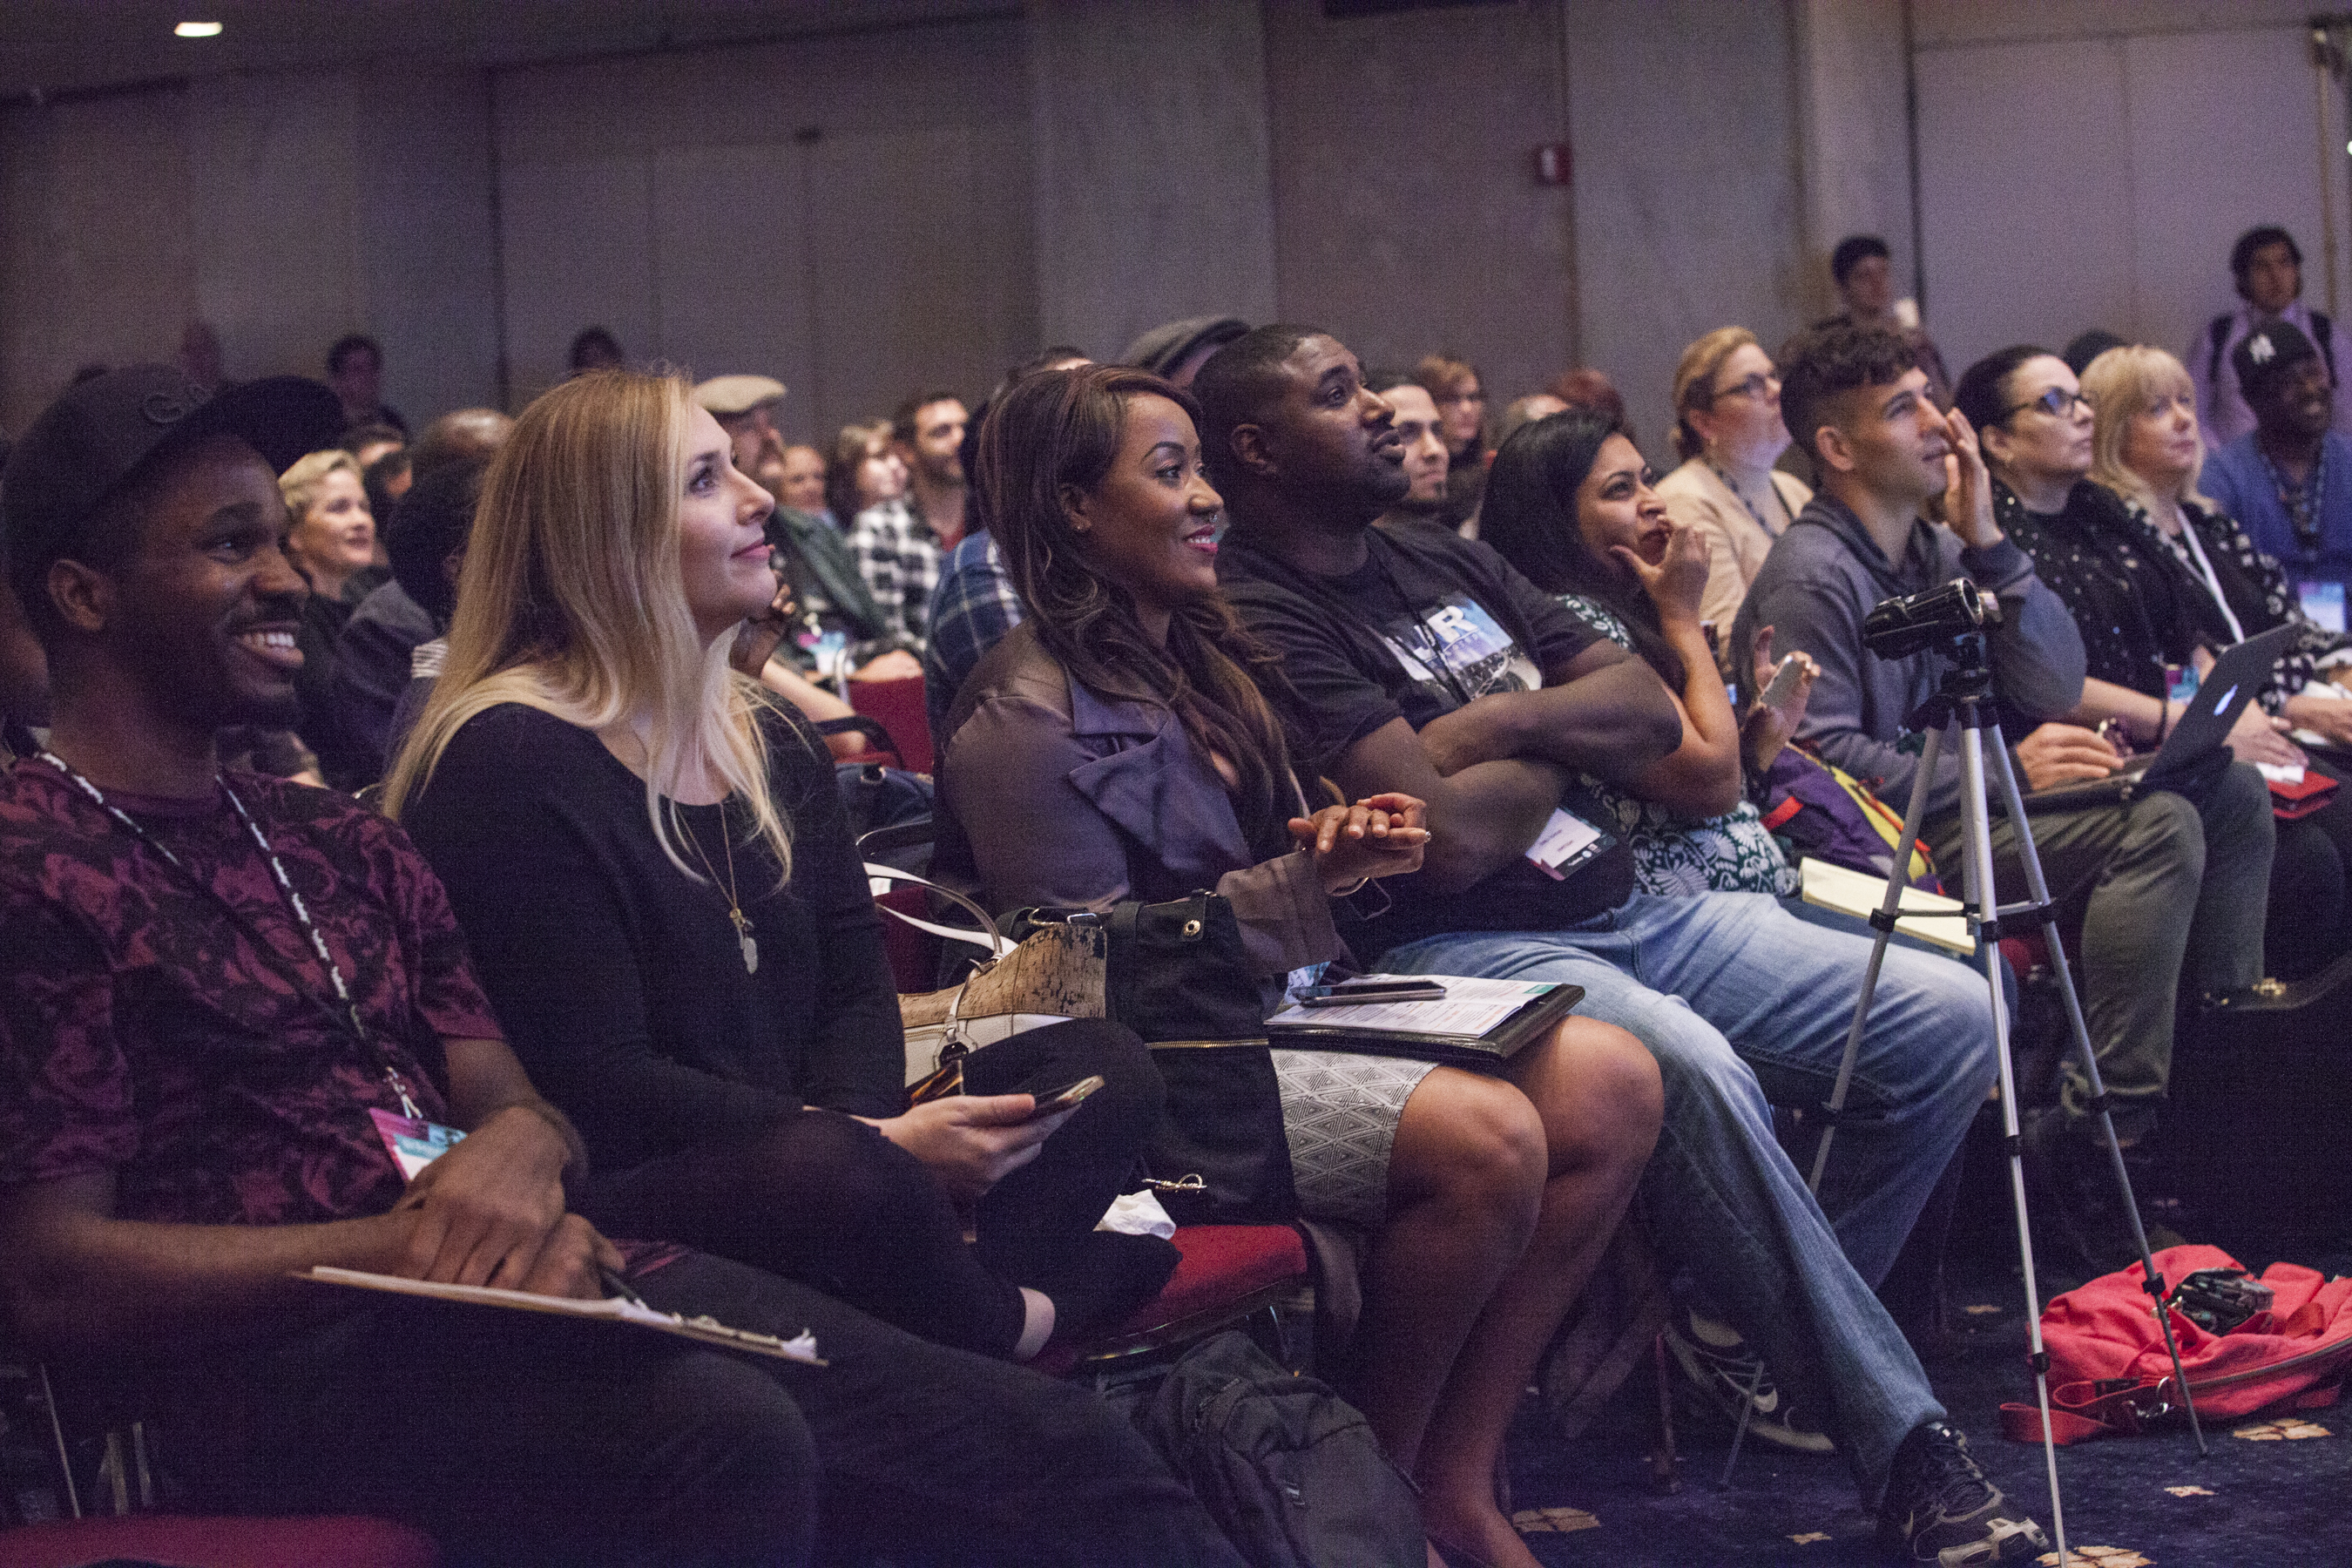 What to expect at the DIY Musician Conference